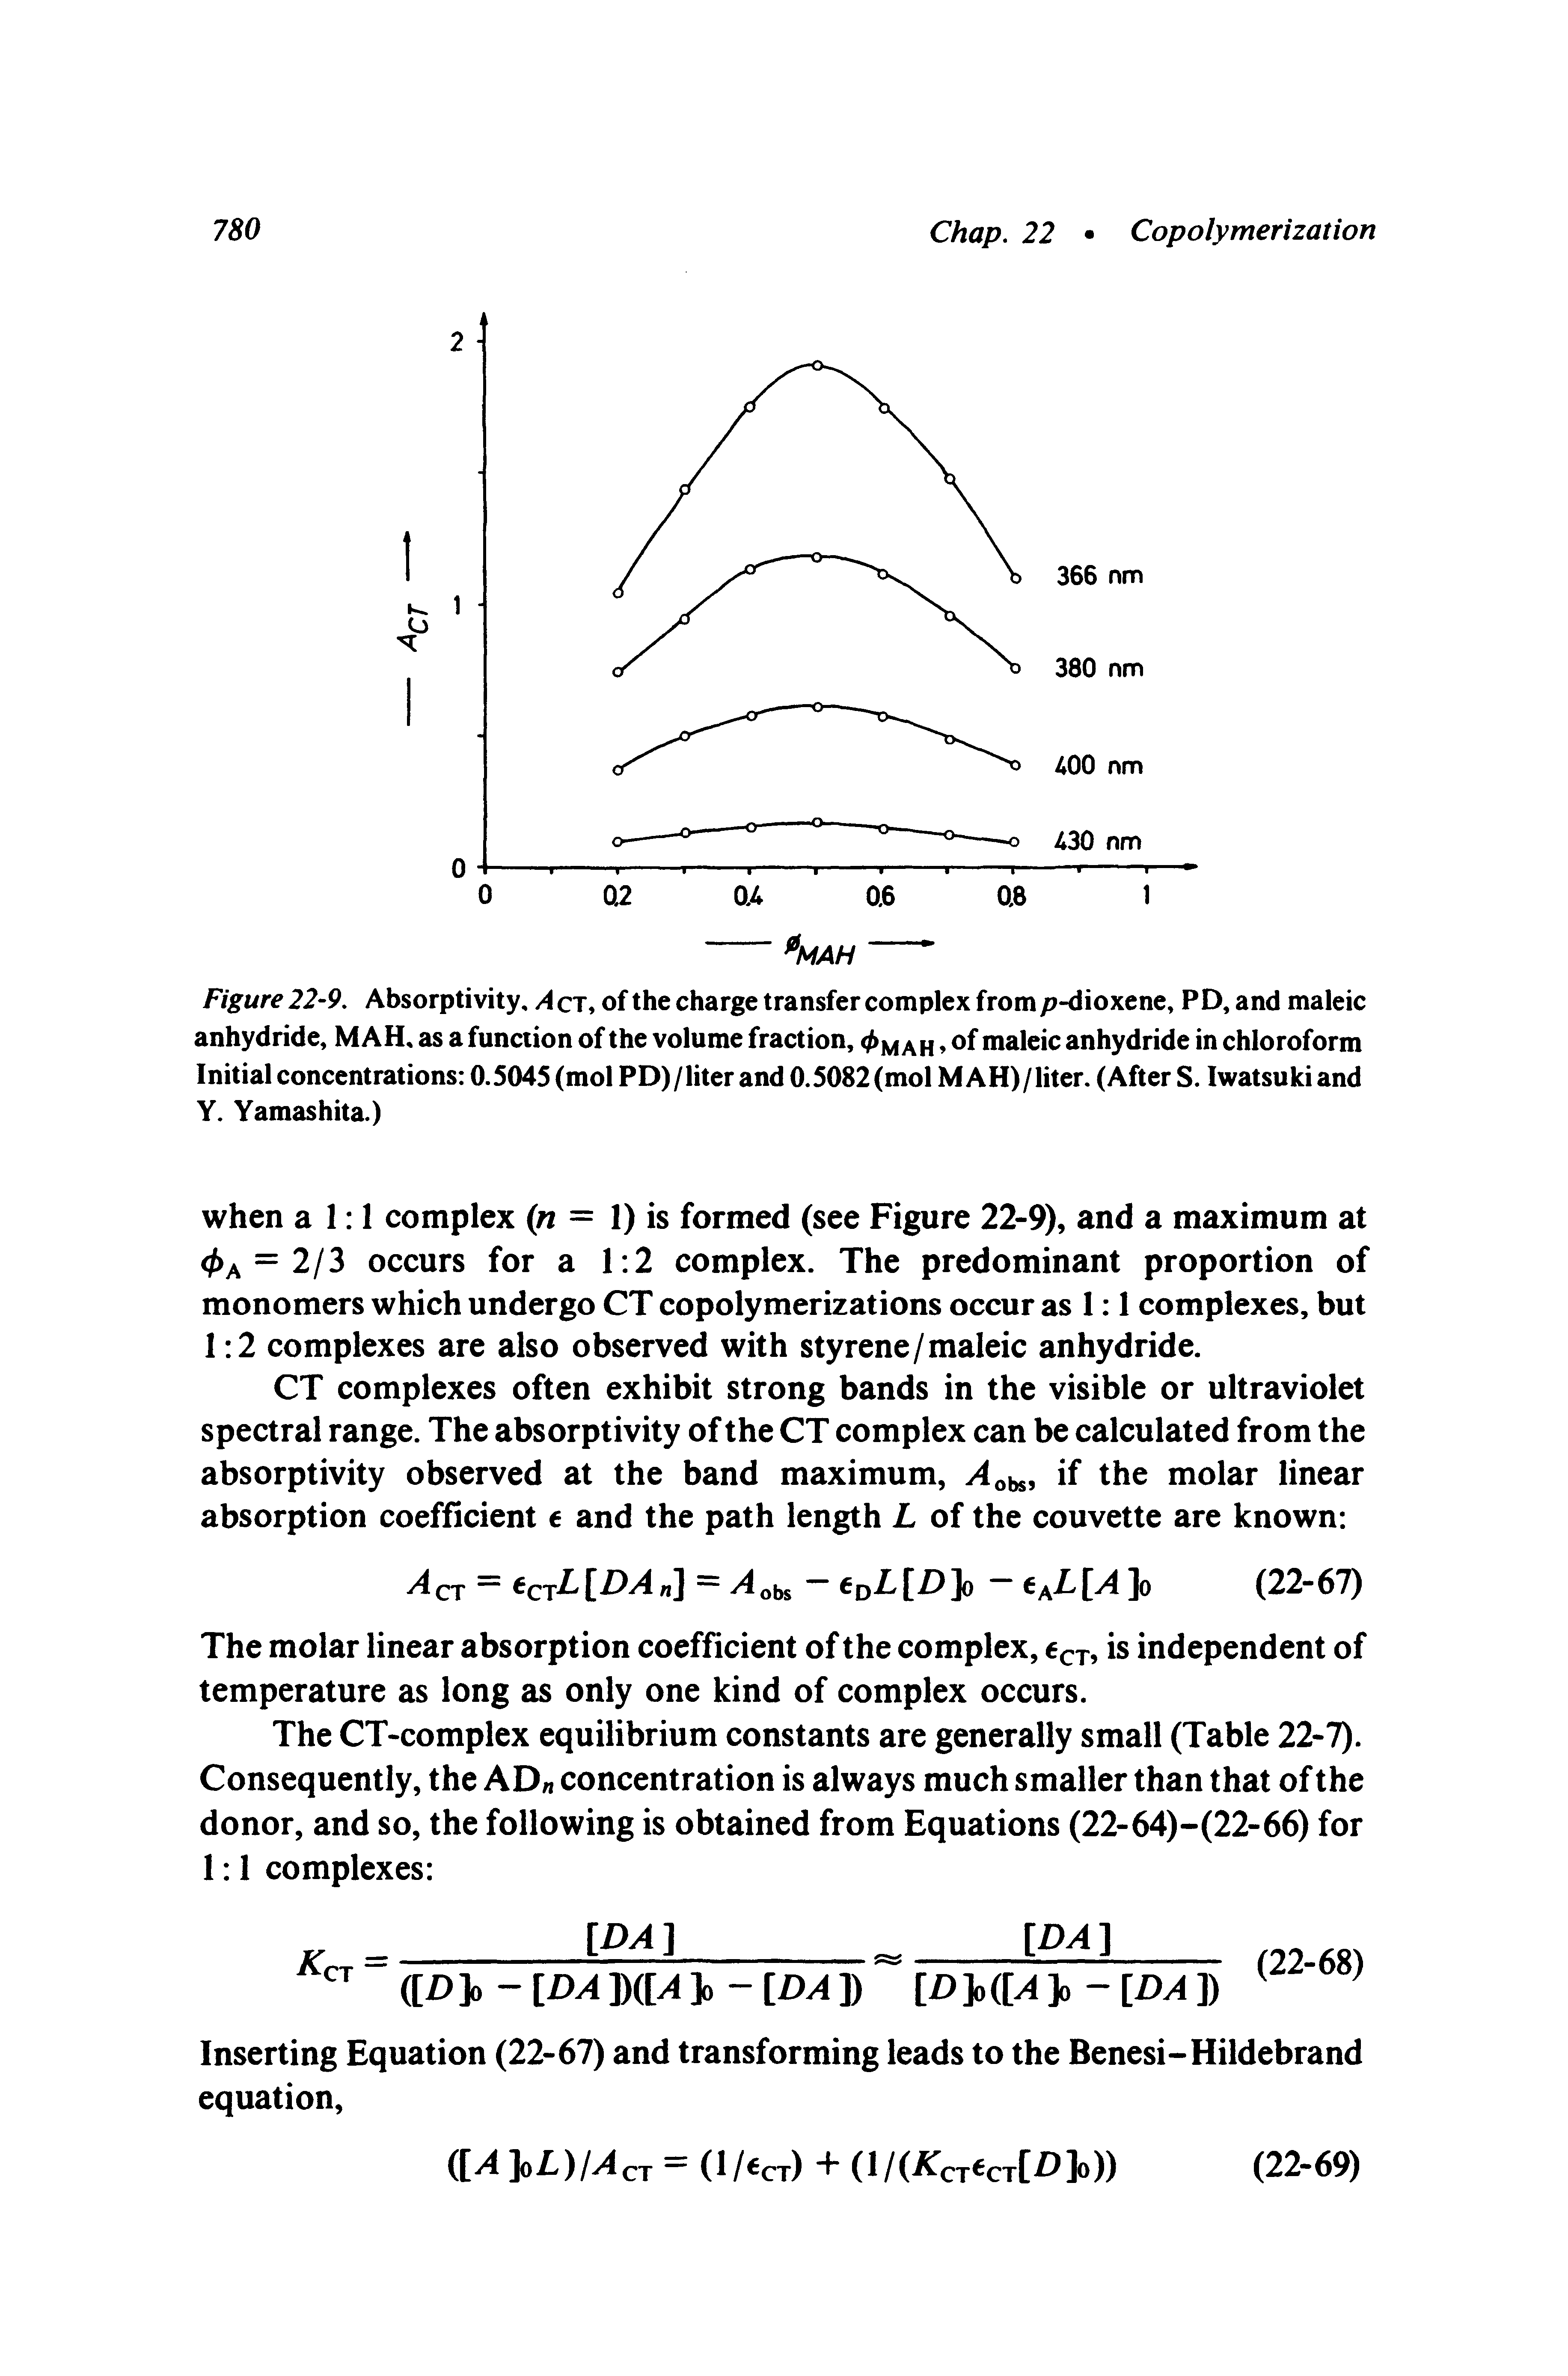 Figure 22-9, Absorptivity, A CT, of the charge transfer complex from p-dioxene, PD, and maleic anhydride, MAH, as a function of the volume fraction, 0m ah maleic anhydride in chloroform Initial concentrations 0.5045 (mol PD)/liter and 0.5082(mol MAH)/liter. (After S. Iwatsukiand Y. Yamashita.)...